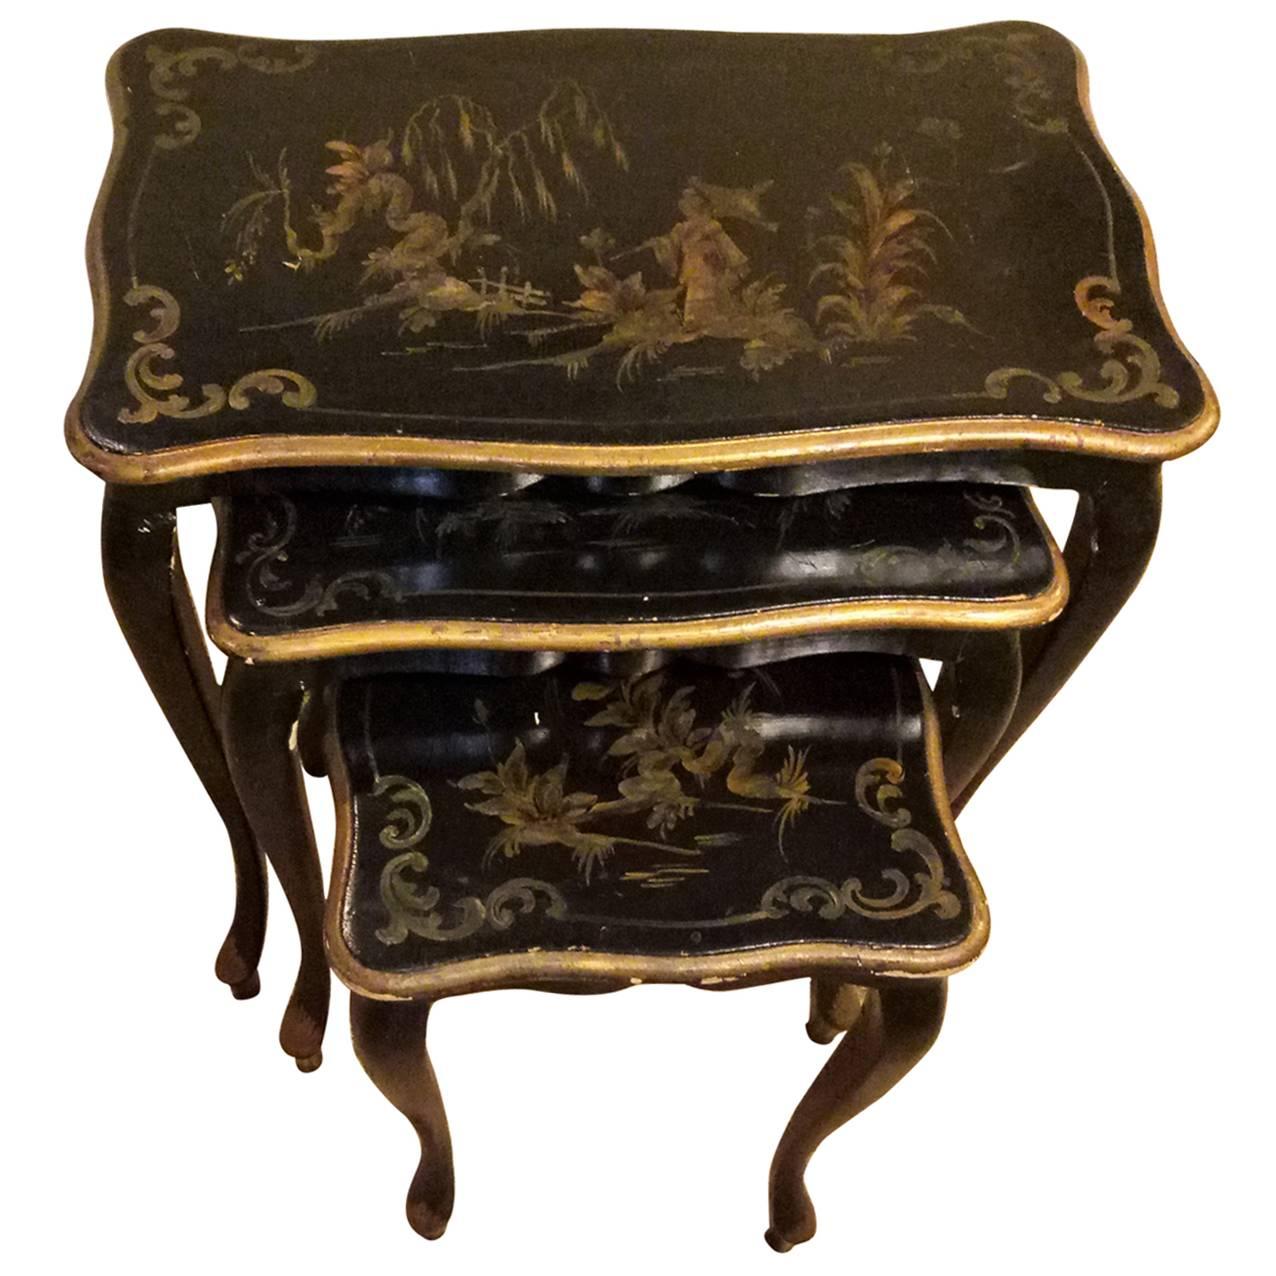 Set of Ebonized Chinoiserie Decorated Stack or Nesting Tables